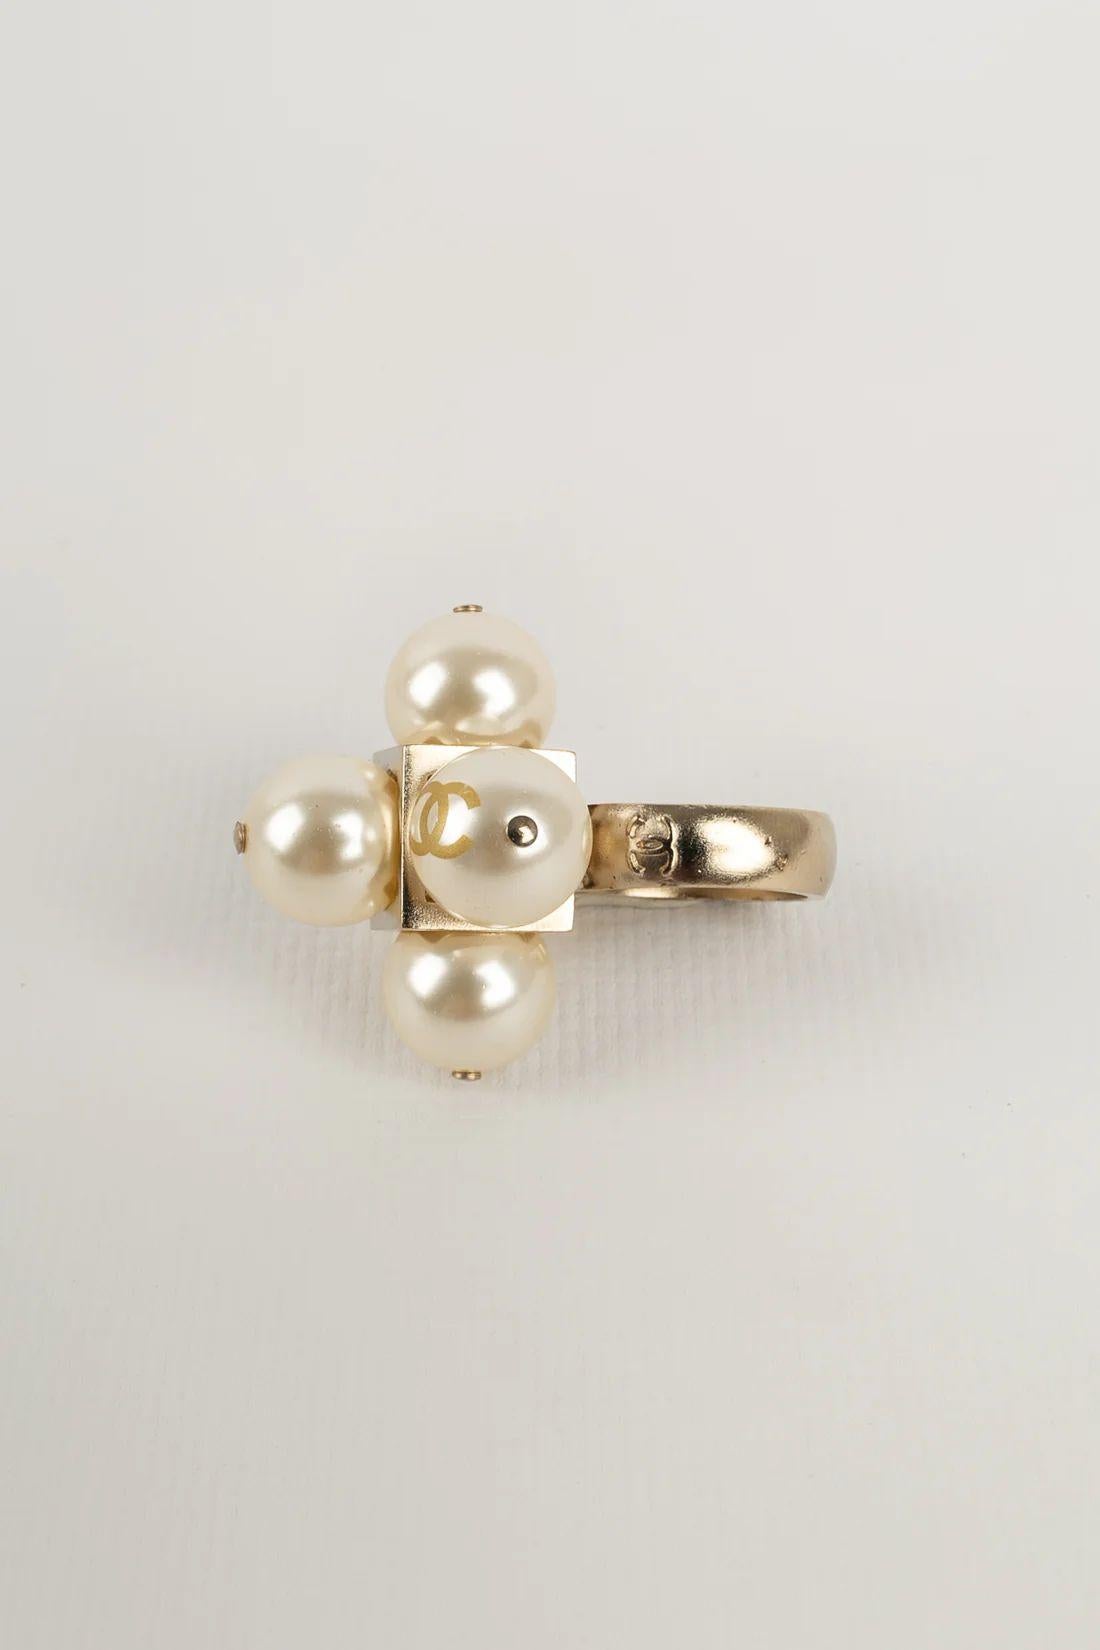 Chanel - (Made in France) Gold metal and pearl ring. Collection 2014.

Additional information:
Dimensions: Size 53

Condition: Very good condition

Seller Ref number: BGB12